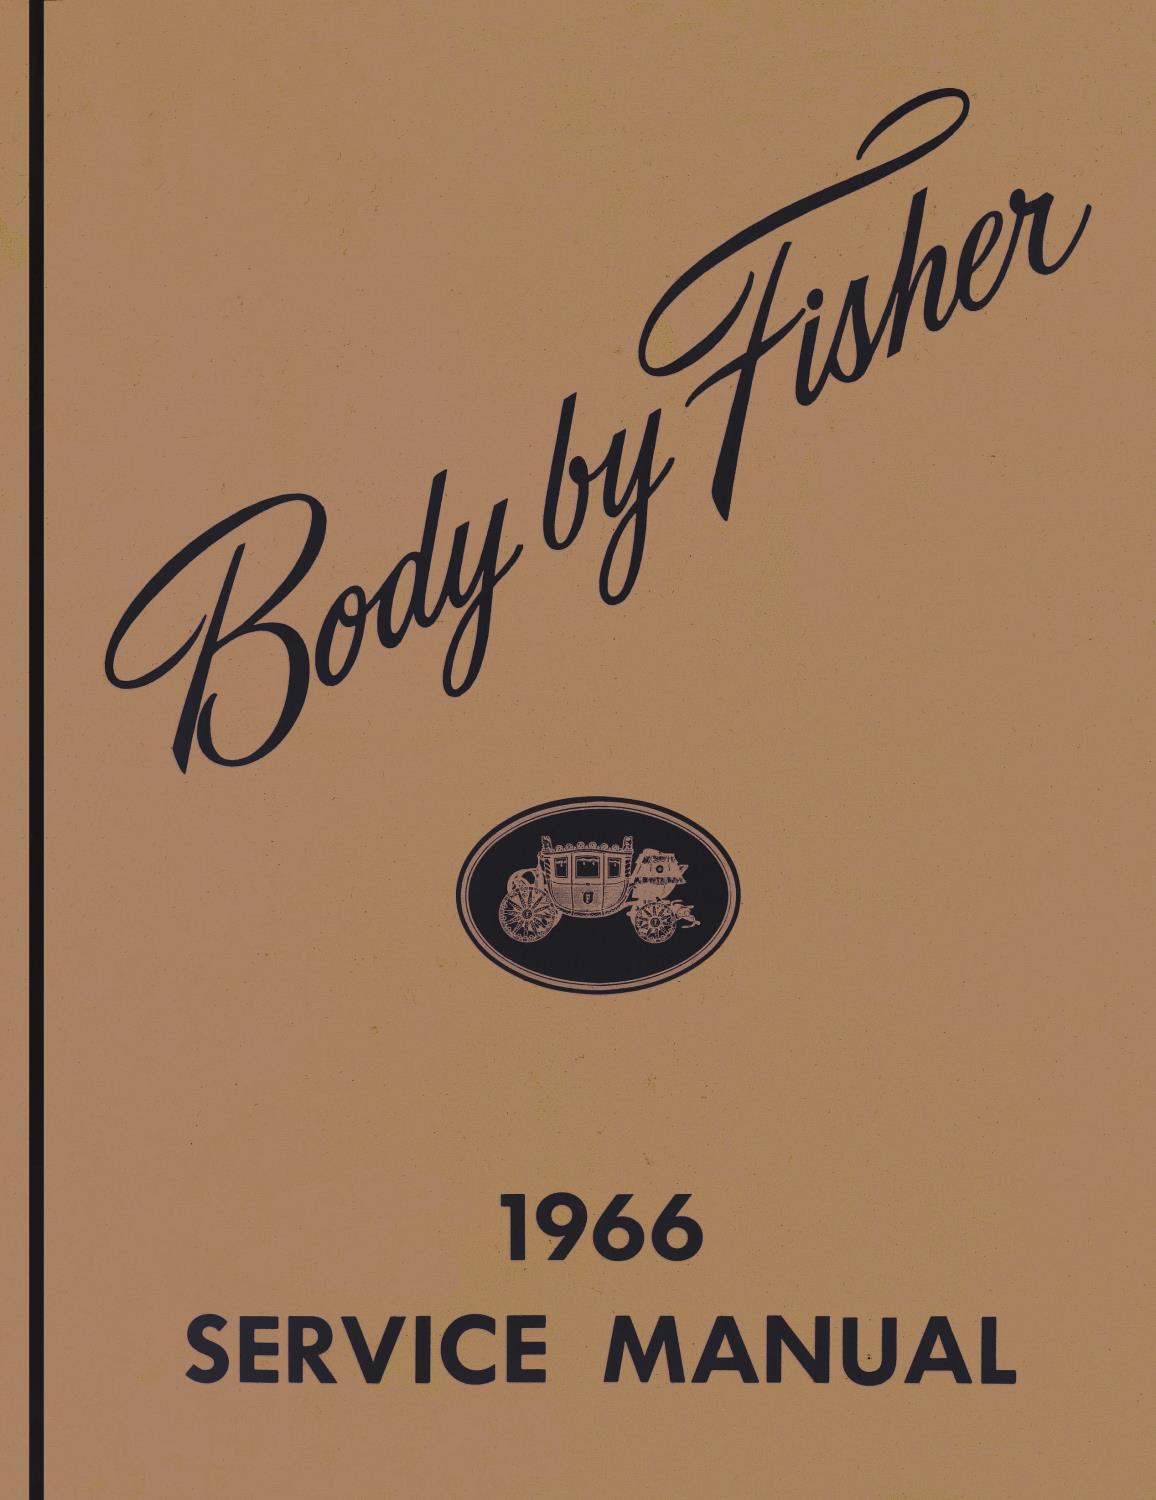 Fisher Body Service Manual for 1966 Buick, Cadillac, Chevrolet, Oldsmobile and Pontiac Models, A-B-C-D-E-G-X Body Styles